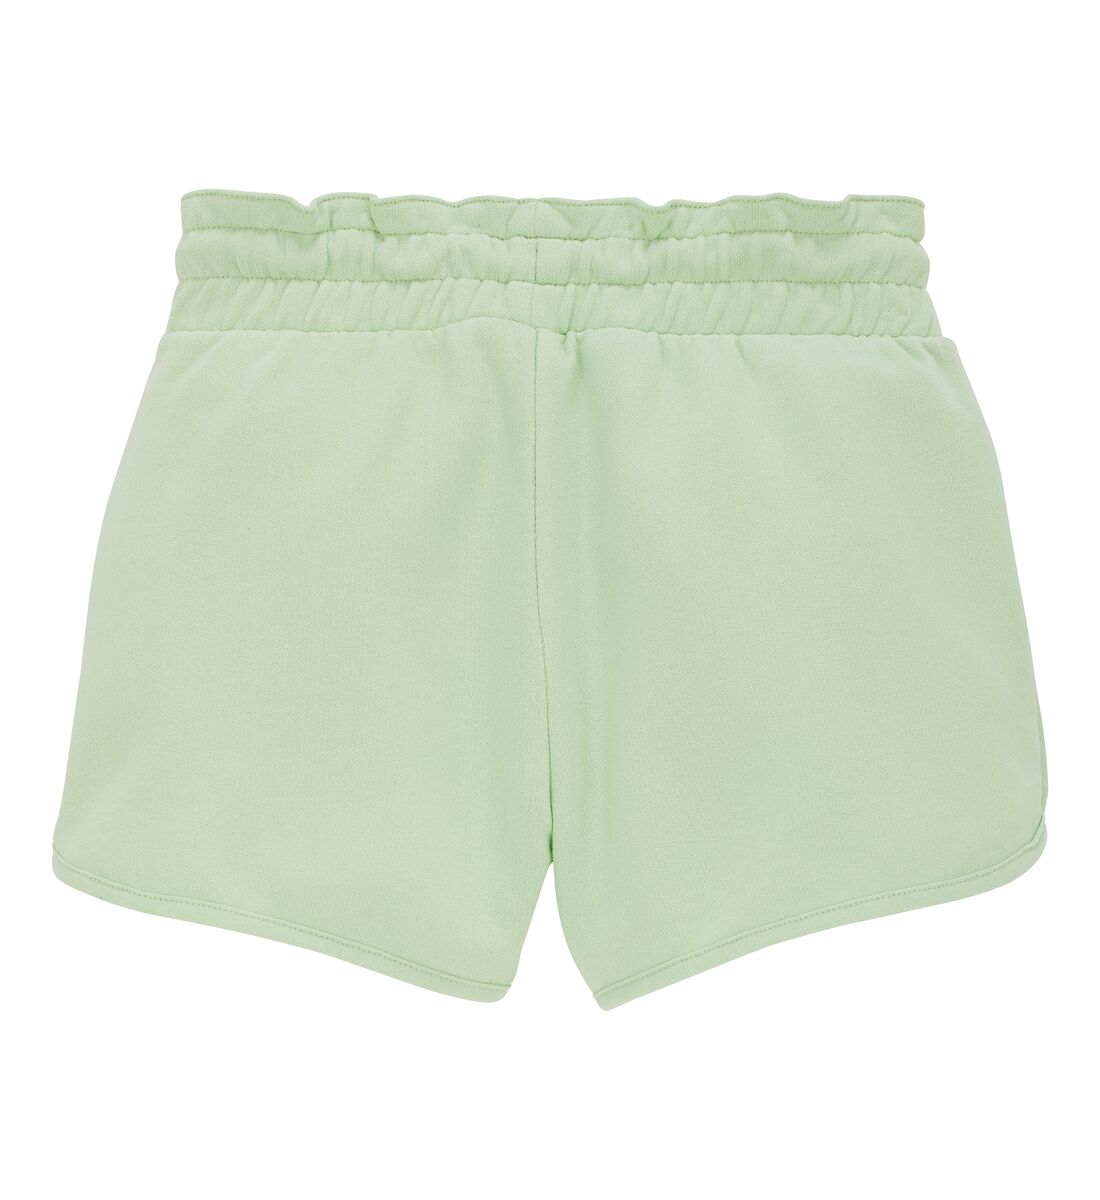 Girls Cotton Shorts Solid